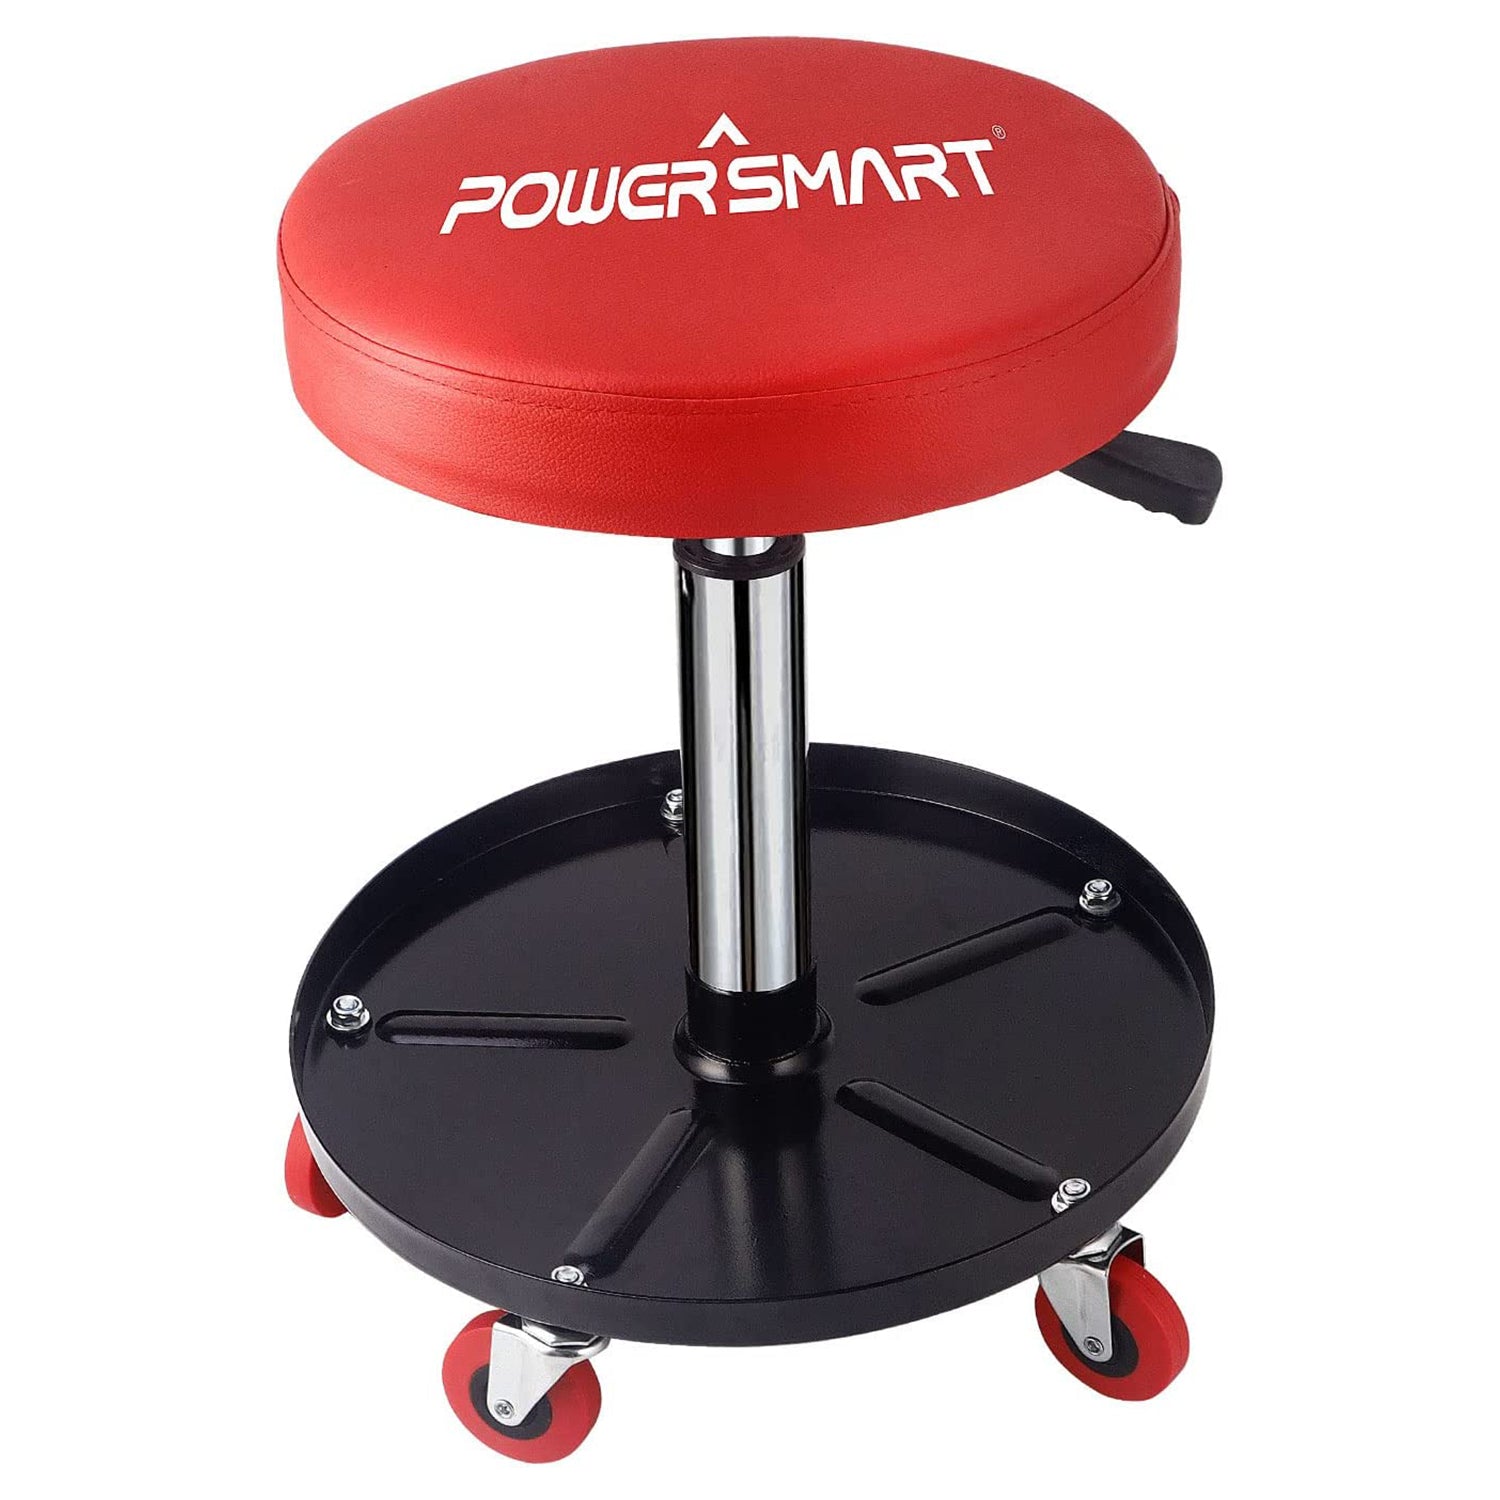 300-pound Capacity Rolling Mechanic Stool - Adjustable Height, Pneumatic Creeper Garage/Shop Seat with Wheels PS1101